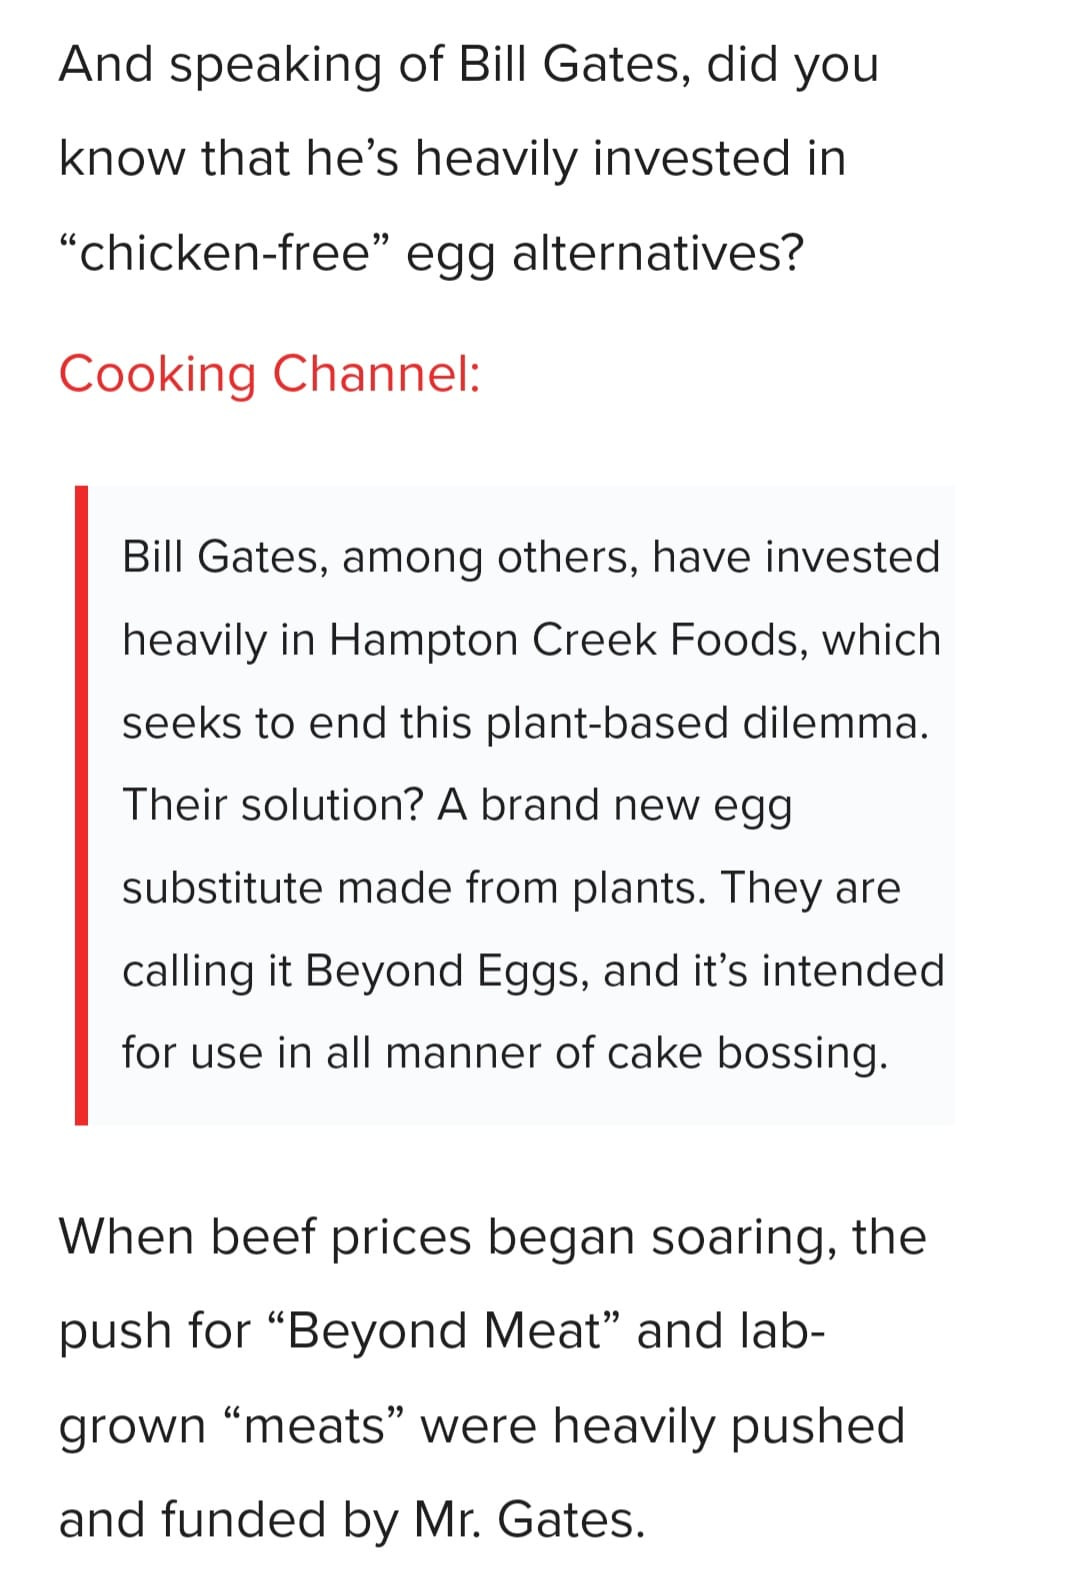 May be an image of text that says 'And speaking of Bill Gates, did you know that he's heavily invested in "chicken-free" egg alternatives? Cooking Channel: Bill Gates, among others, have invested heavily in Hampton Creek Foods, which seeks to end this plant-based dilemma. Their solution? A brand new egg substitute made from plants. They are calling it Beyond Eggs, and it's intended for use in all manner of cake bossing. When beef prices began soaring, the push for "Beyond Meat" and lab- grown "meats" were heavily pusheo and funded by Mr. Gates.'